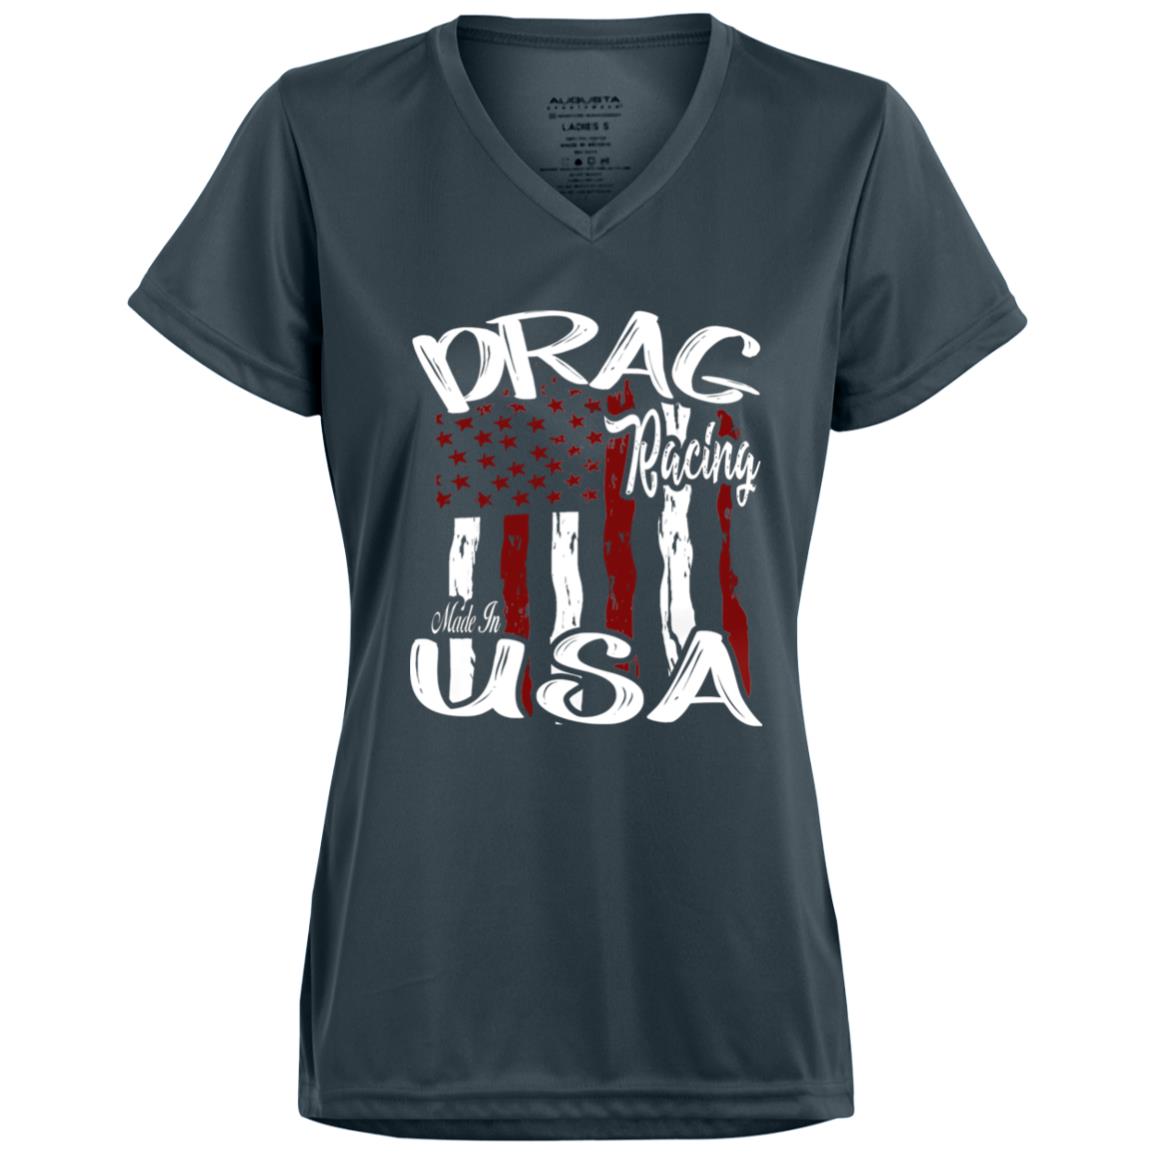 Drag Racing Made In USA Ladies’ Moisture-Wicking V-Neck Tee